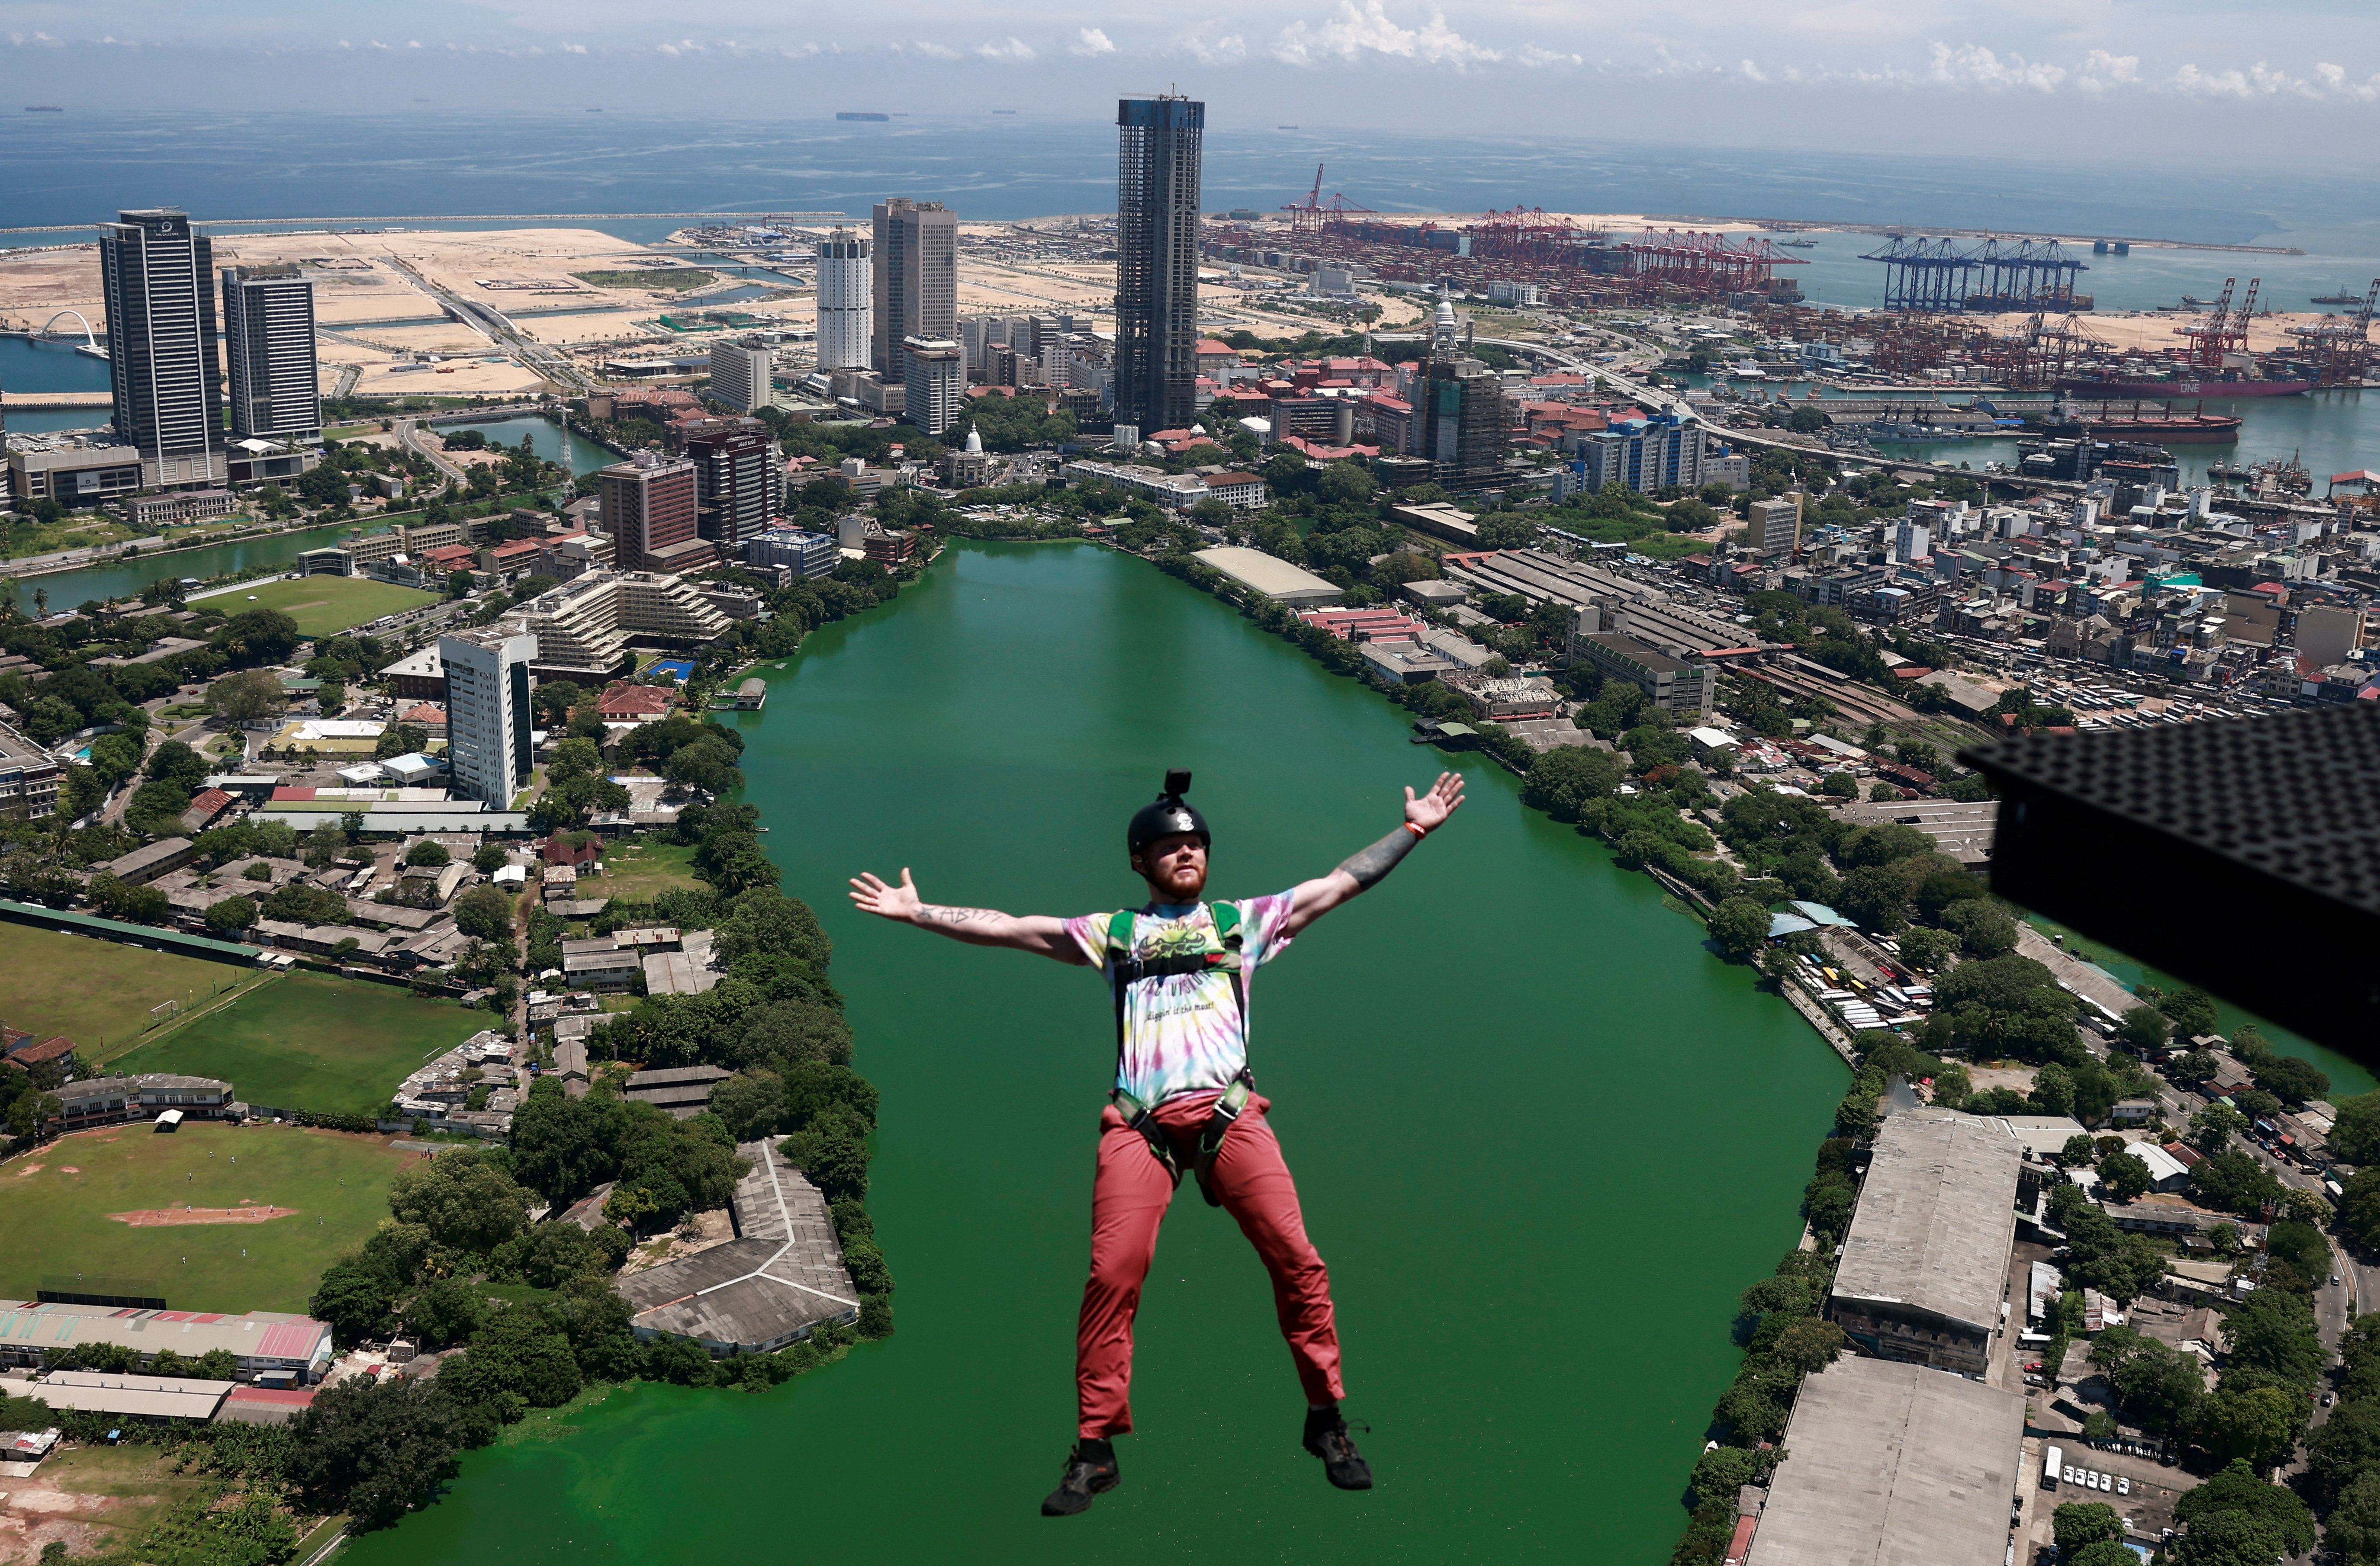 A base jumper leaps off the Lotus Tower, a 351.5 m tall tower in Colombo